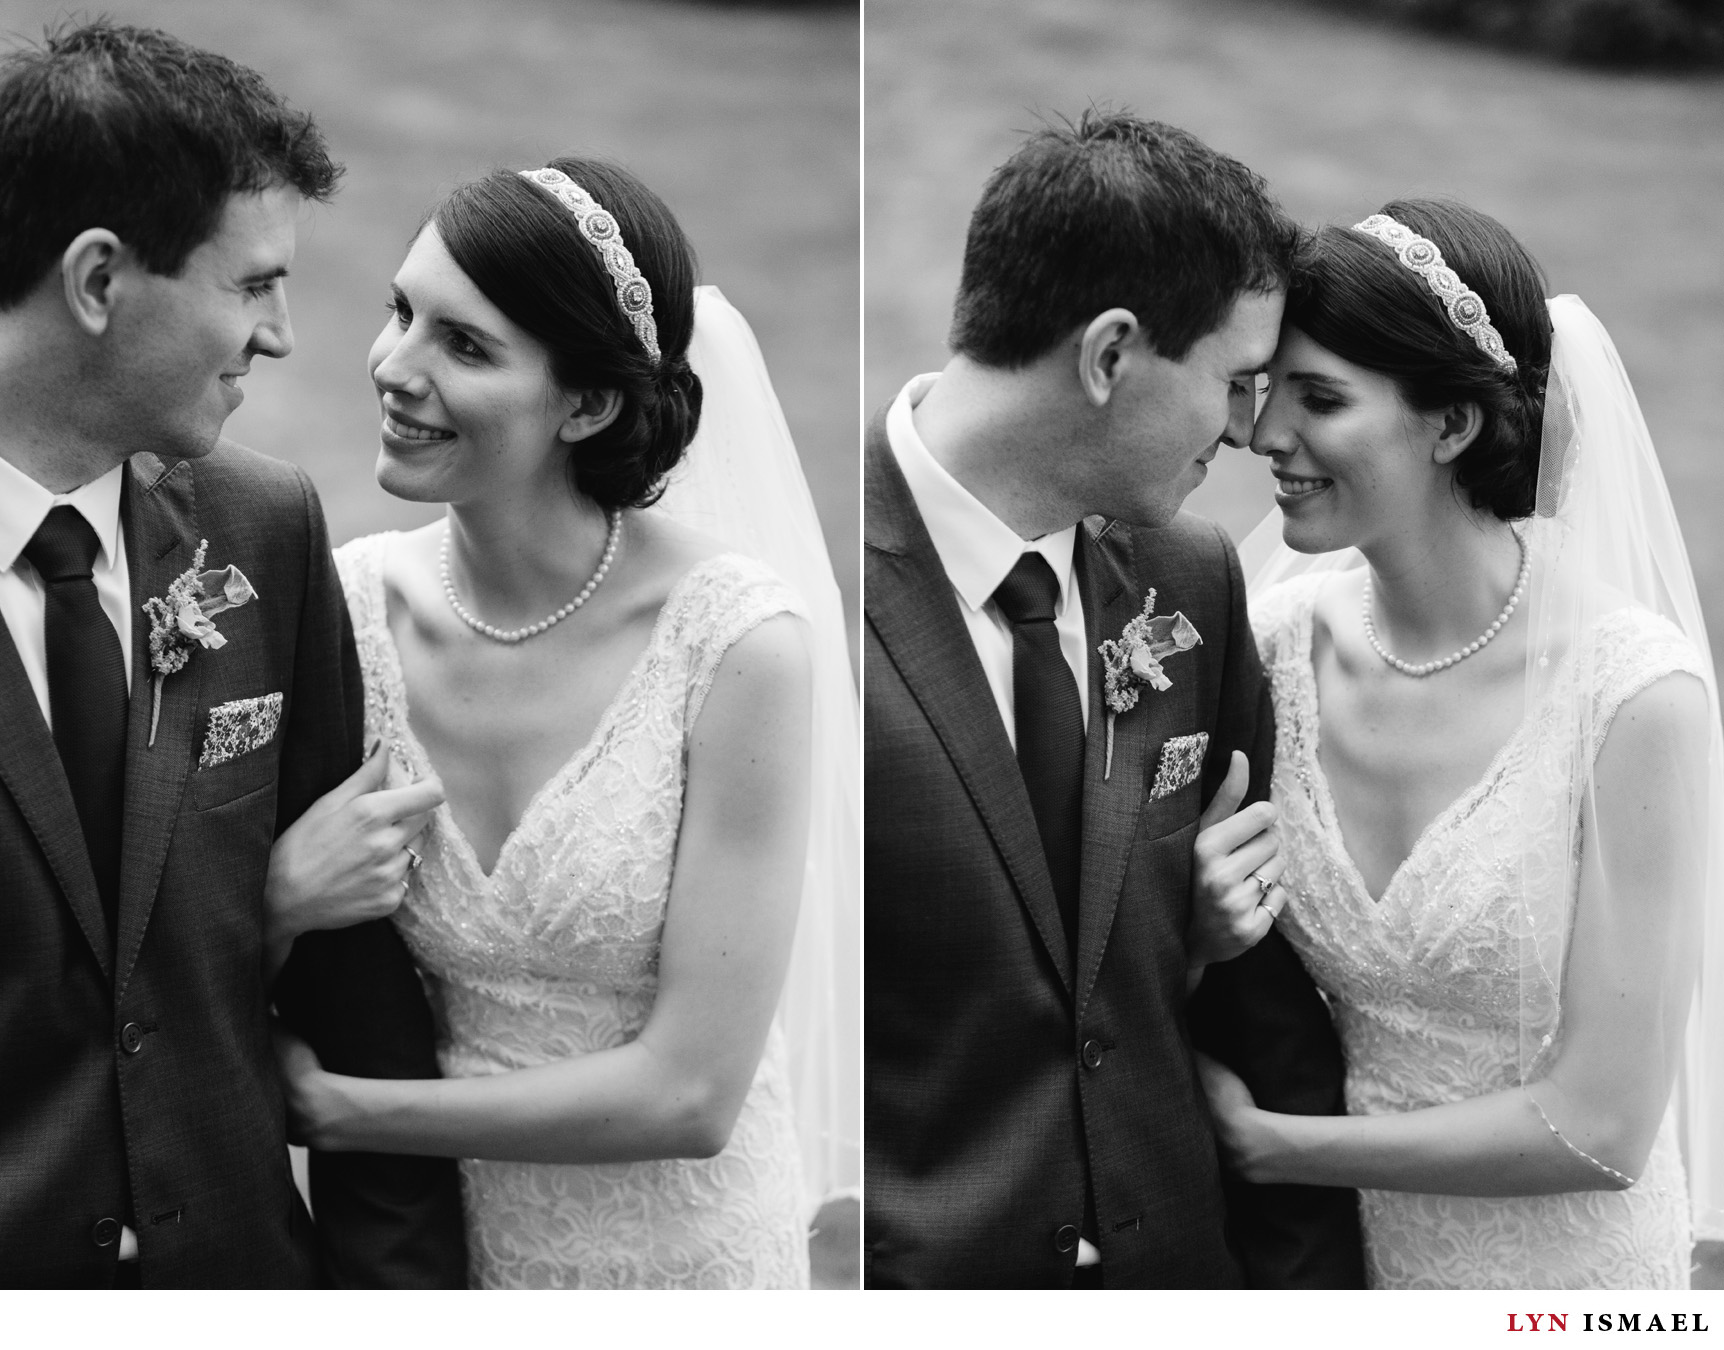 Black and white portraits of the bride and groom who got married at the Windermere Manor.